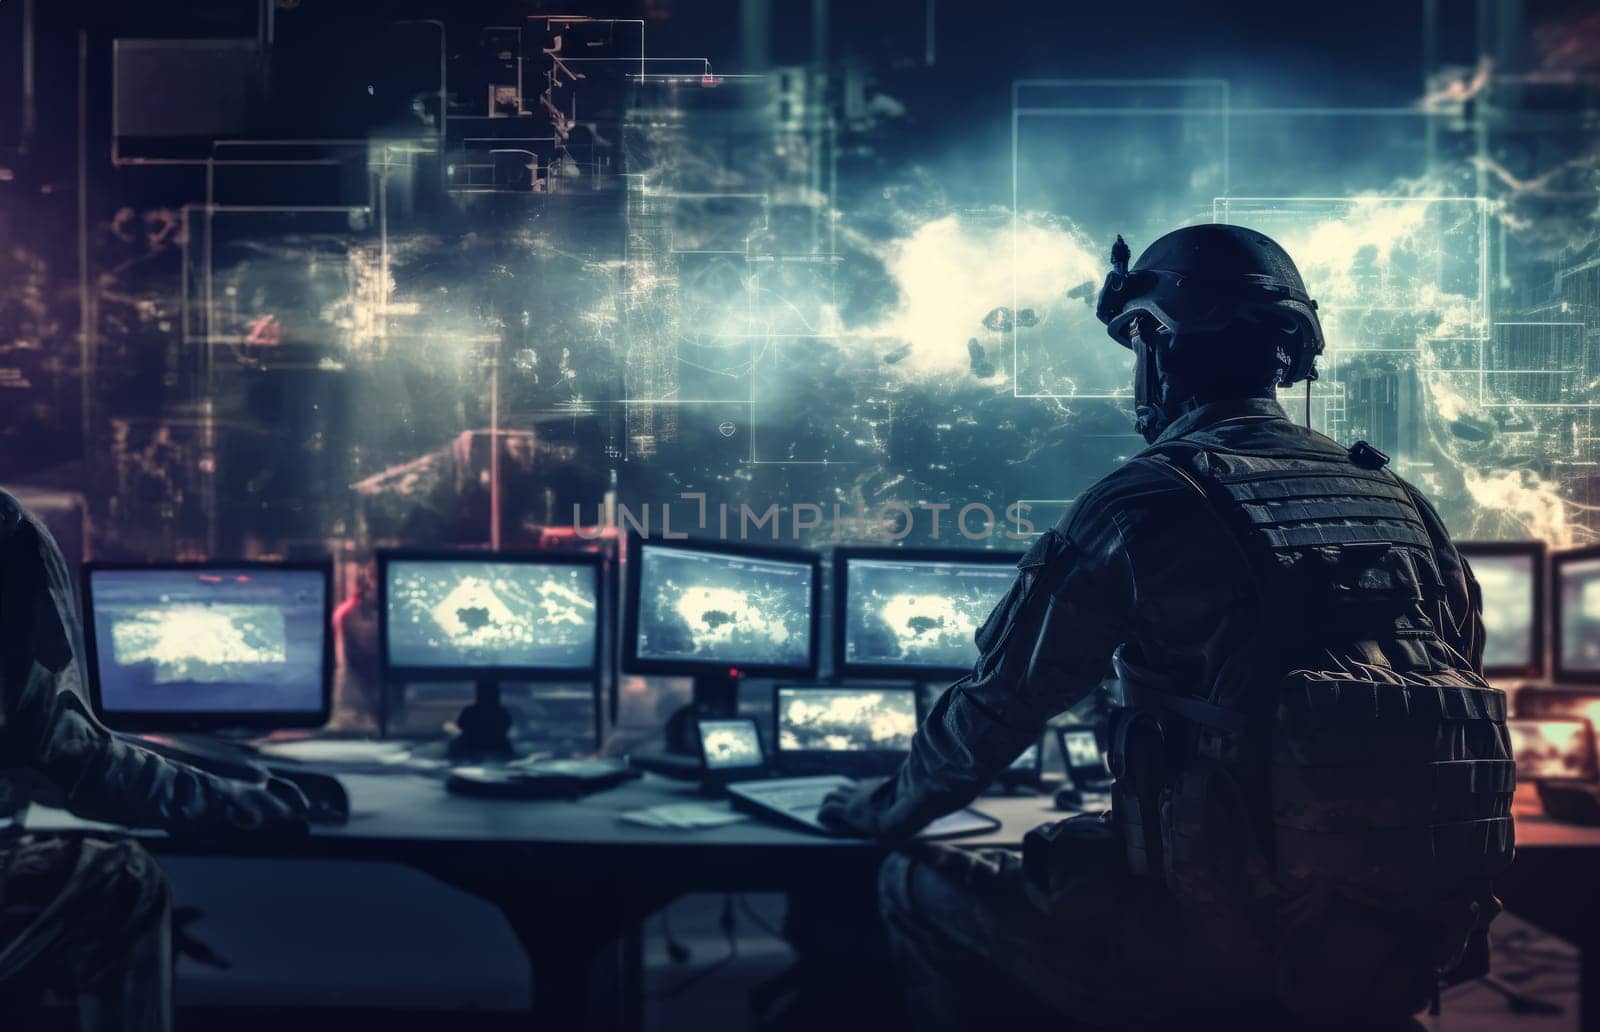 A professional soldier utilizes advanced technology as he interfaces with combat holograms on his computer, showcasing the integration of digital tactics in military operations